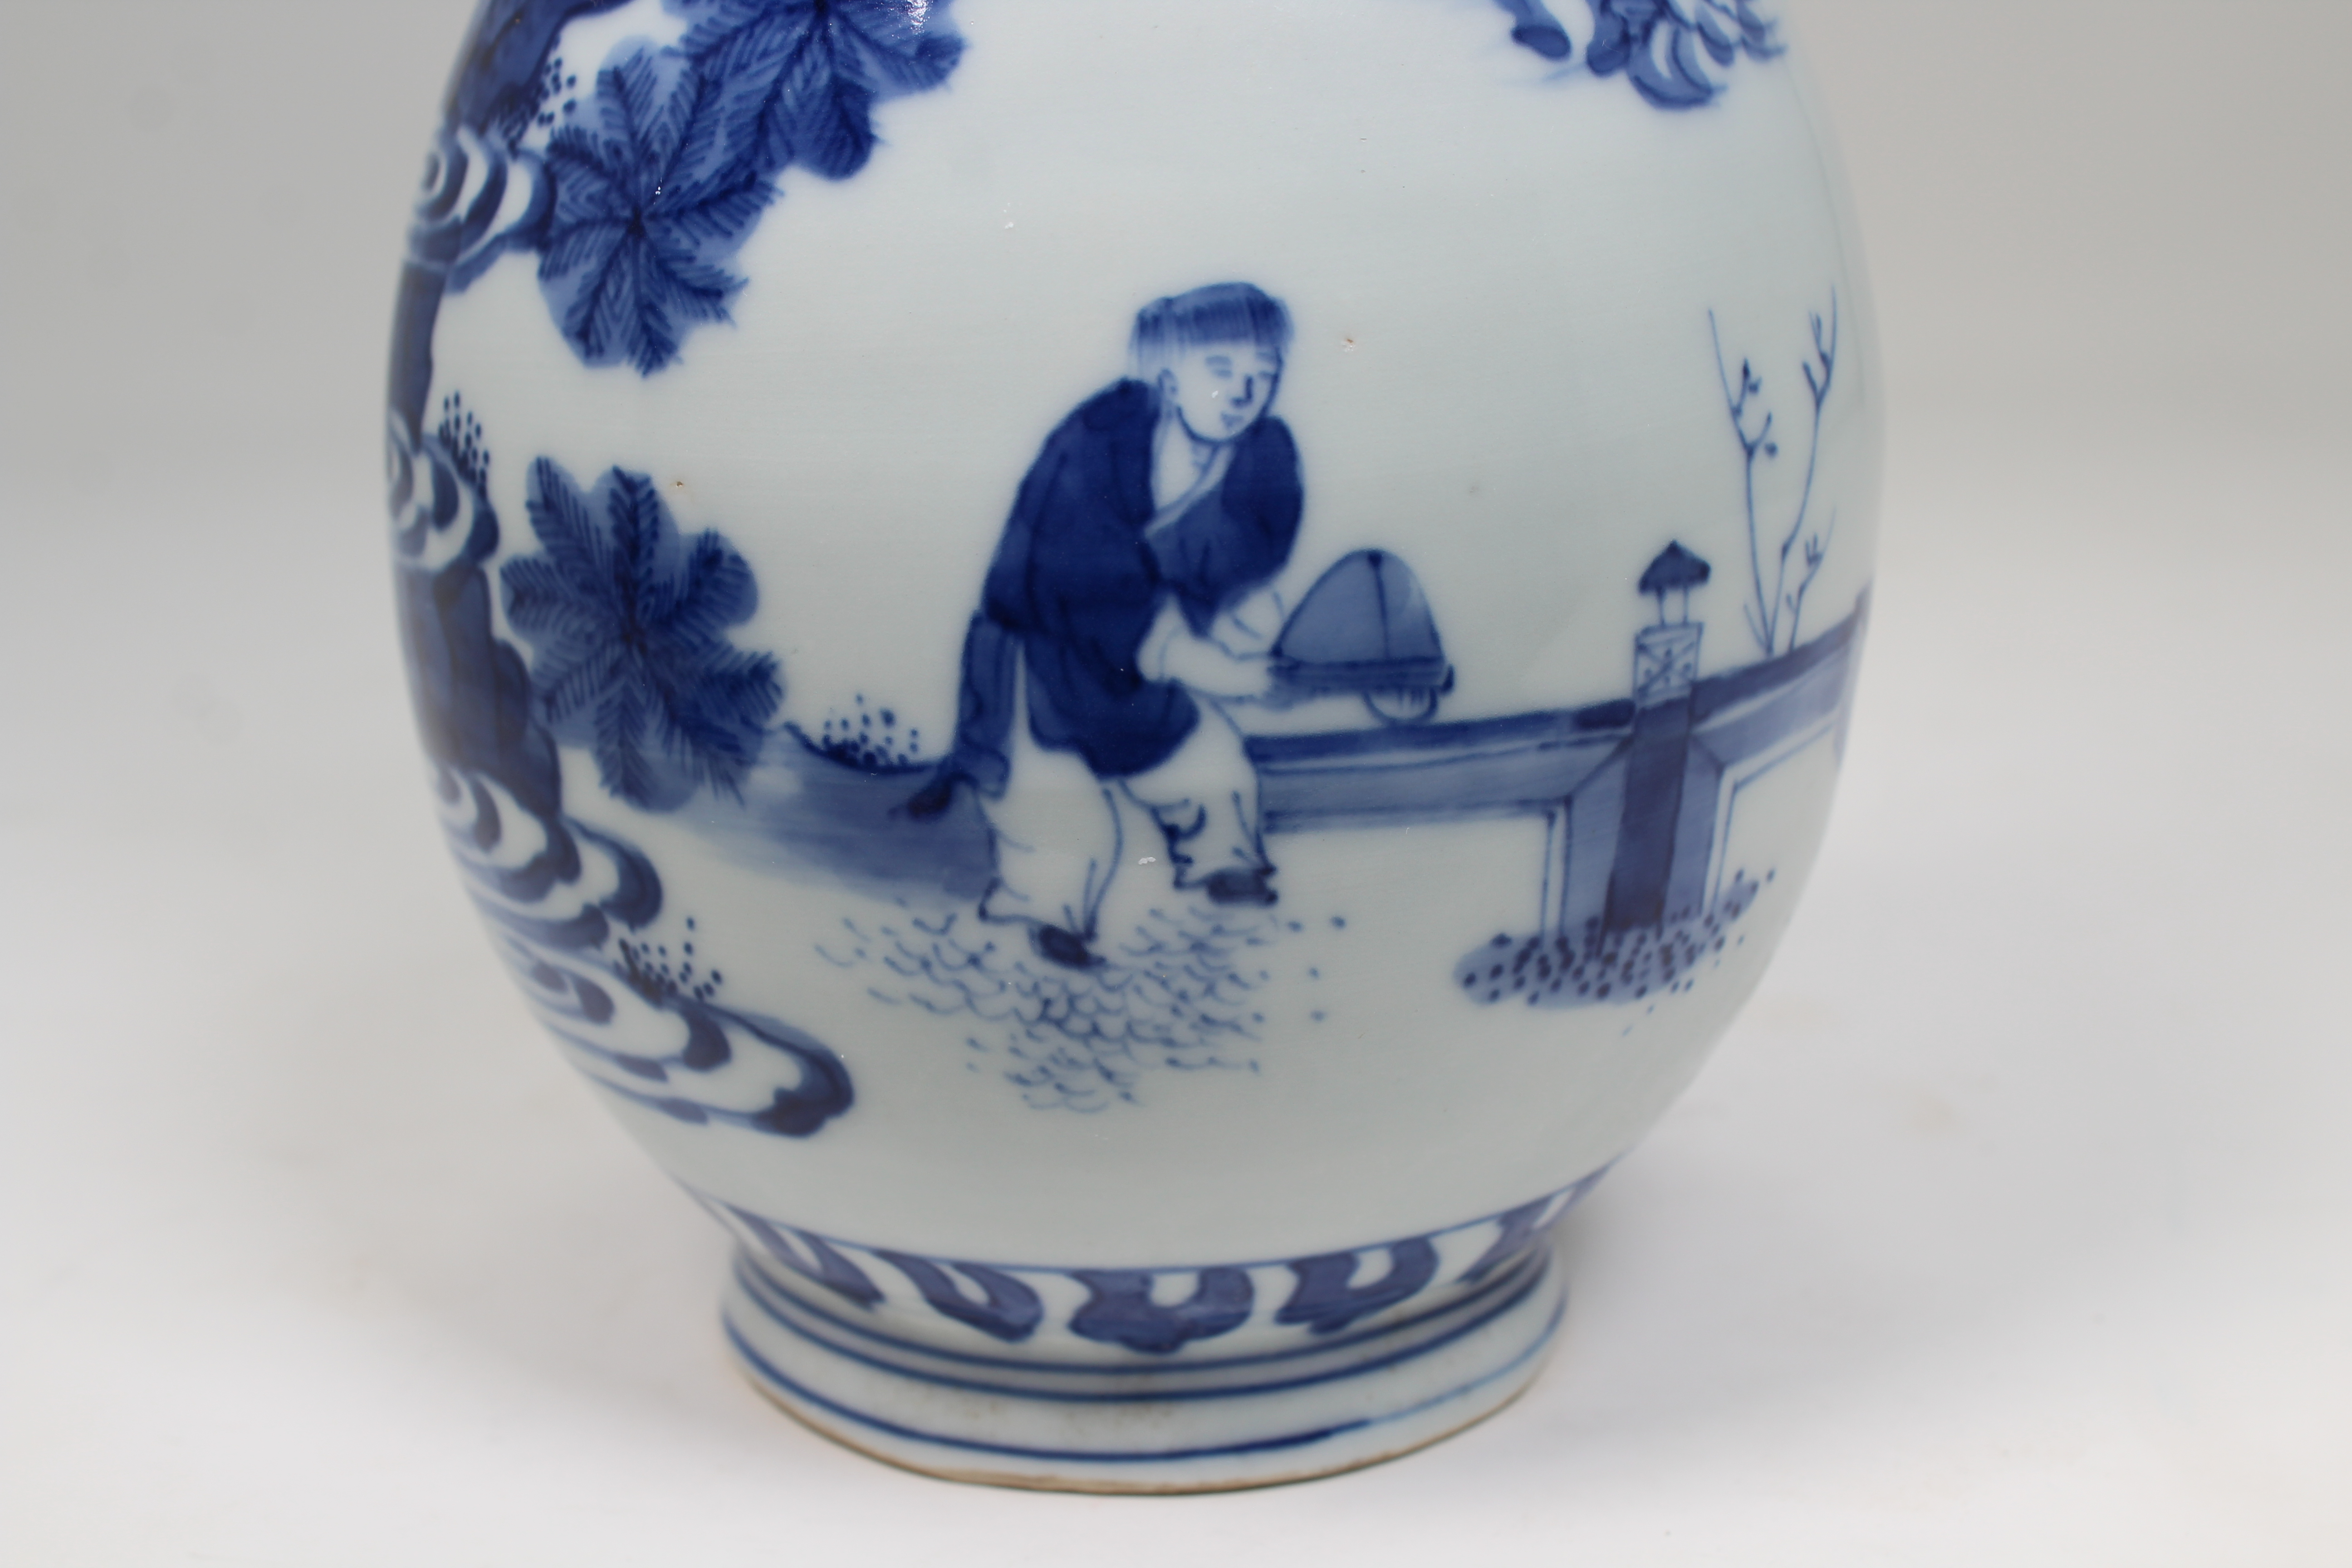 Chinese Blue/White Porcelain Vase. Scene depicts figures conversing. Size: 9 x 4.75 in. - Image 2 of 8